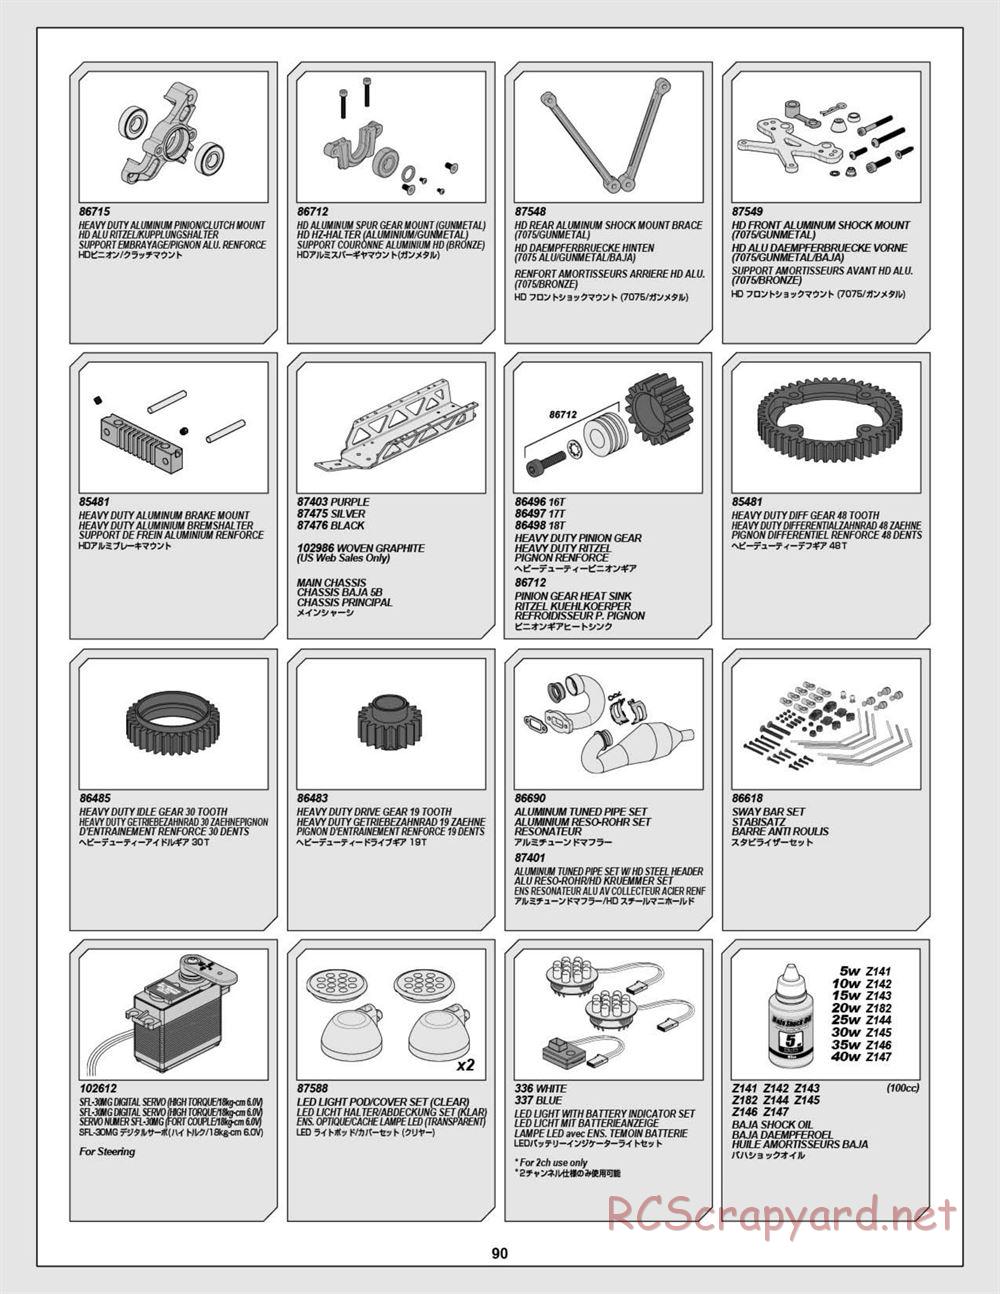 HPI - Baja 5B 2.0 RTR - Exploded View - Page 90